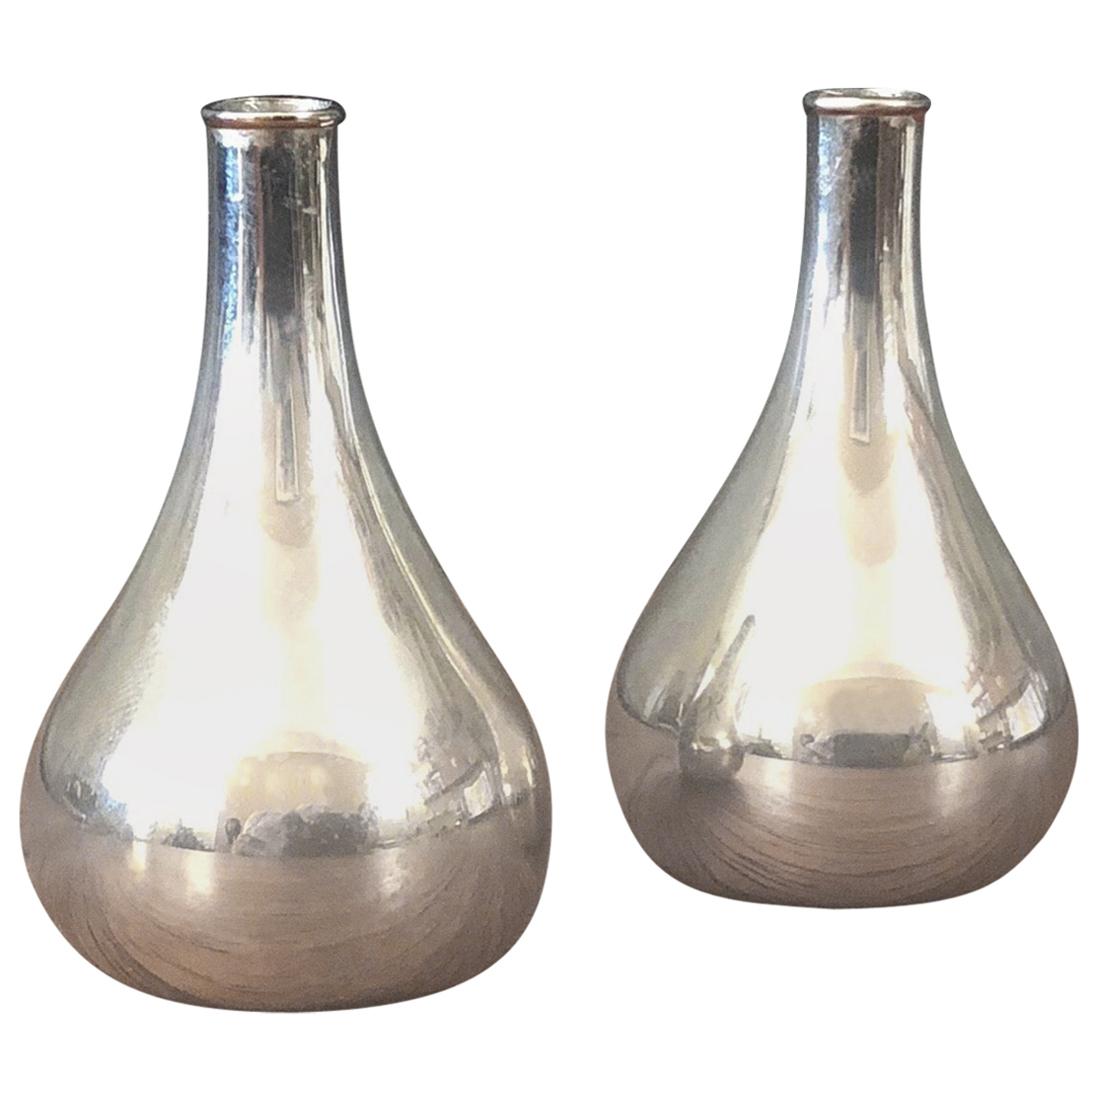 Set of Two Tear Drop Candleholders in Box by Jens Quistgaard for Dansk For Sale